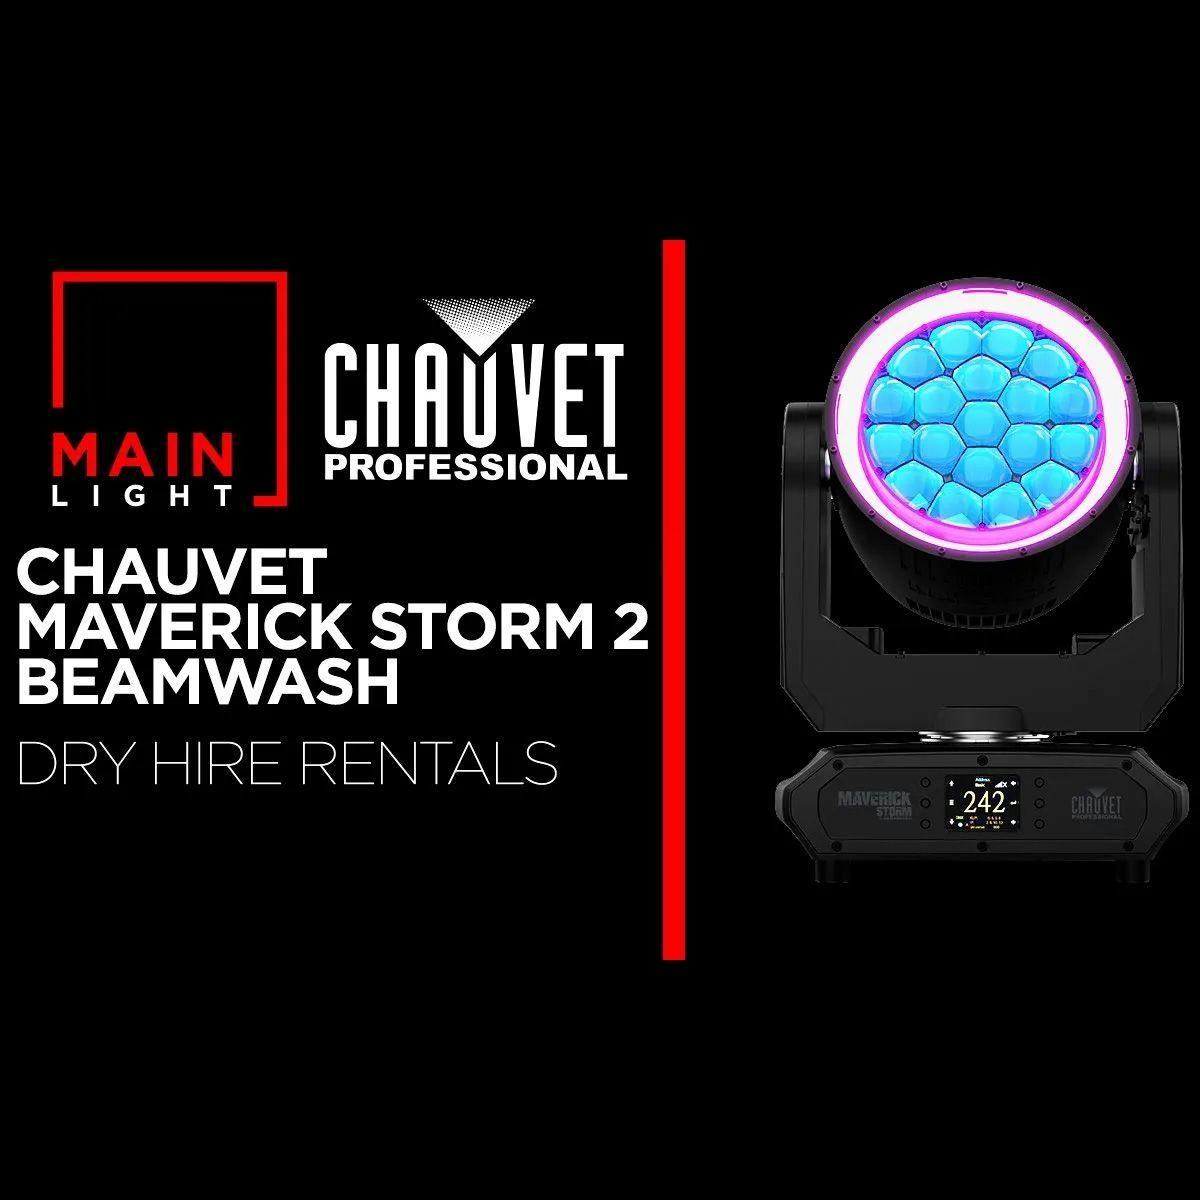 Video thumbnail for the Chauvet Maverick Storm 2 BeamWash Demo Video produced by Main Light